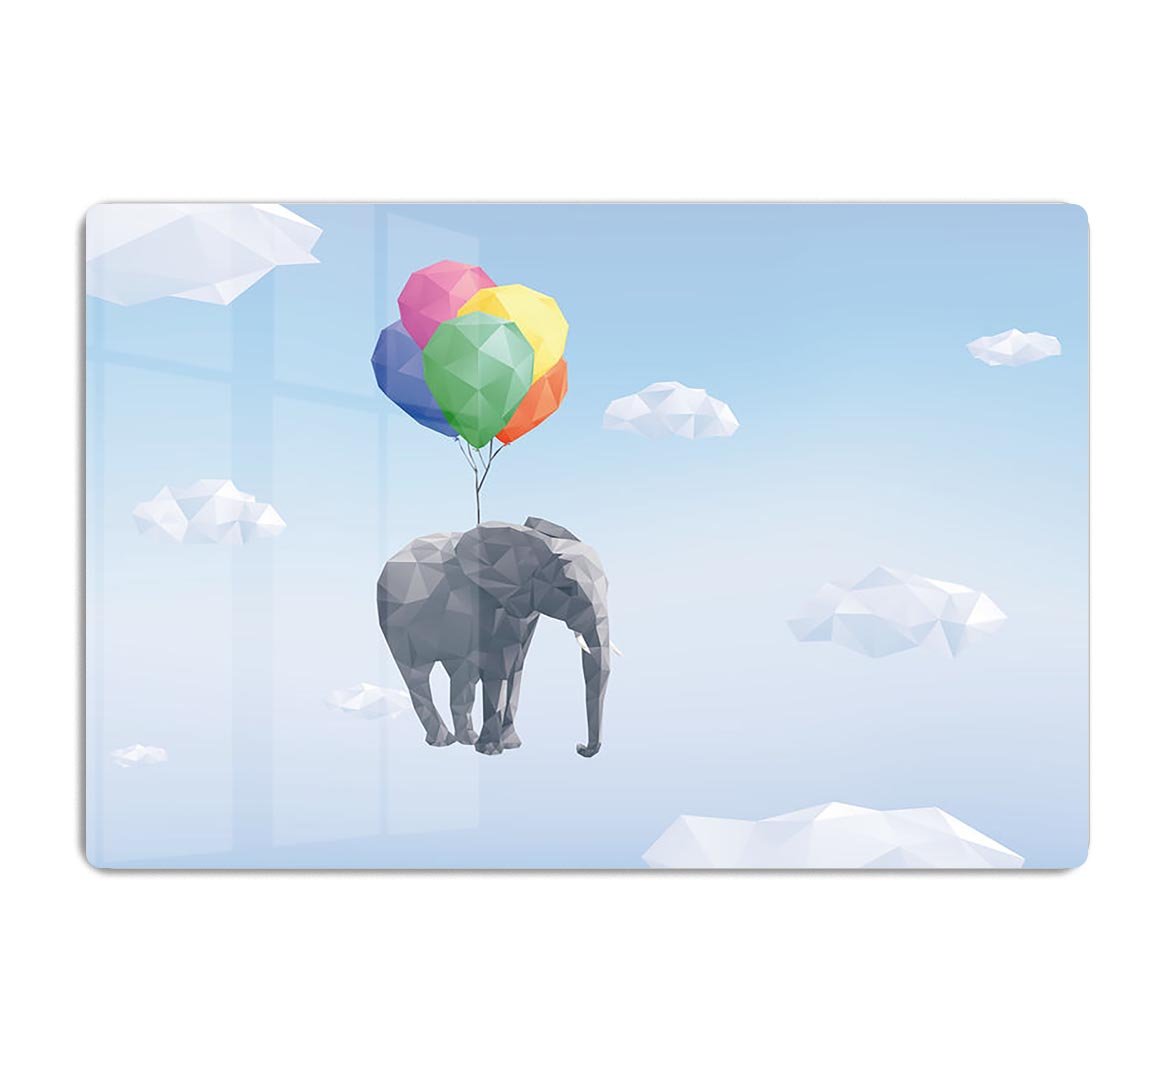 Low Poly Elephant attached to balloons flying through cloudy sky HD Metal Print - Canvas Art Rocks - 1